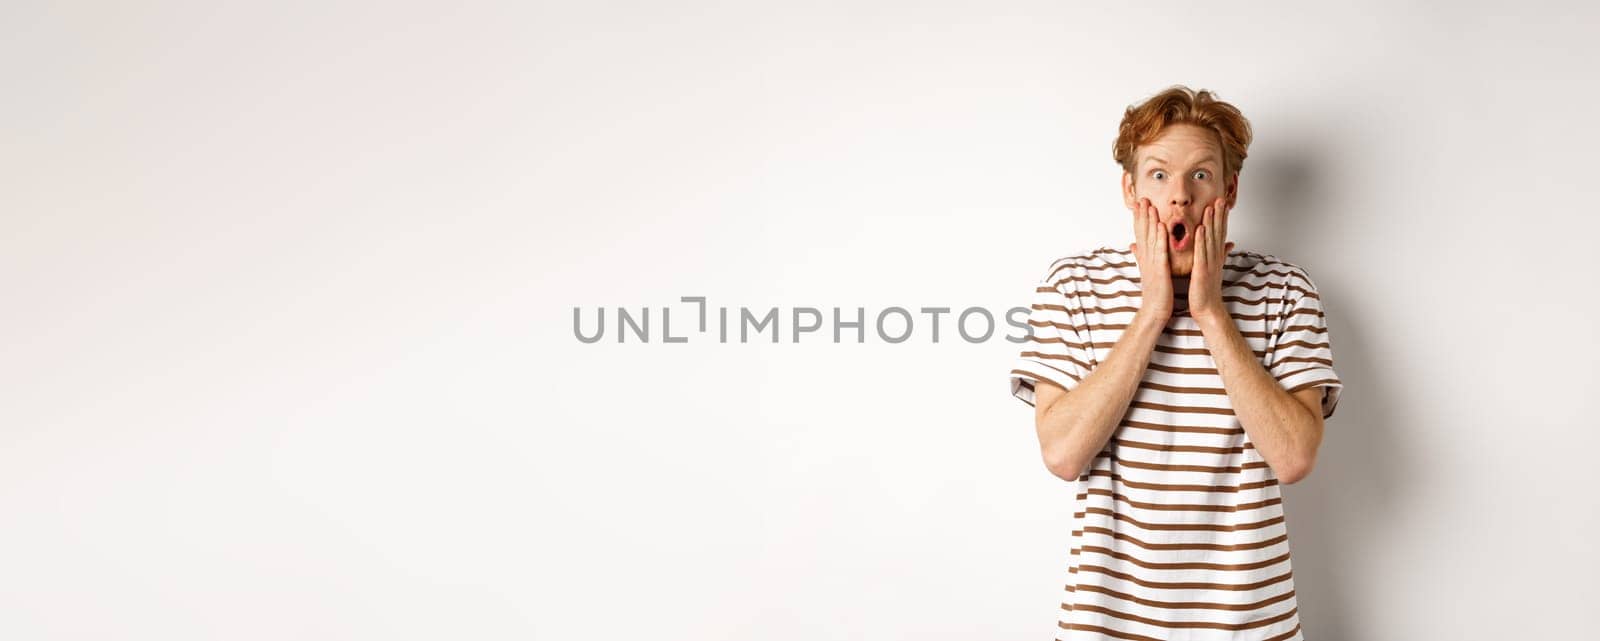 Impressed young man with ginger hair, gasping and staring shocked at camera, express complete disbelief and amazement, white background.